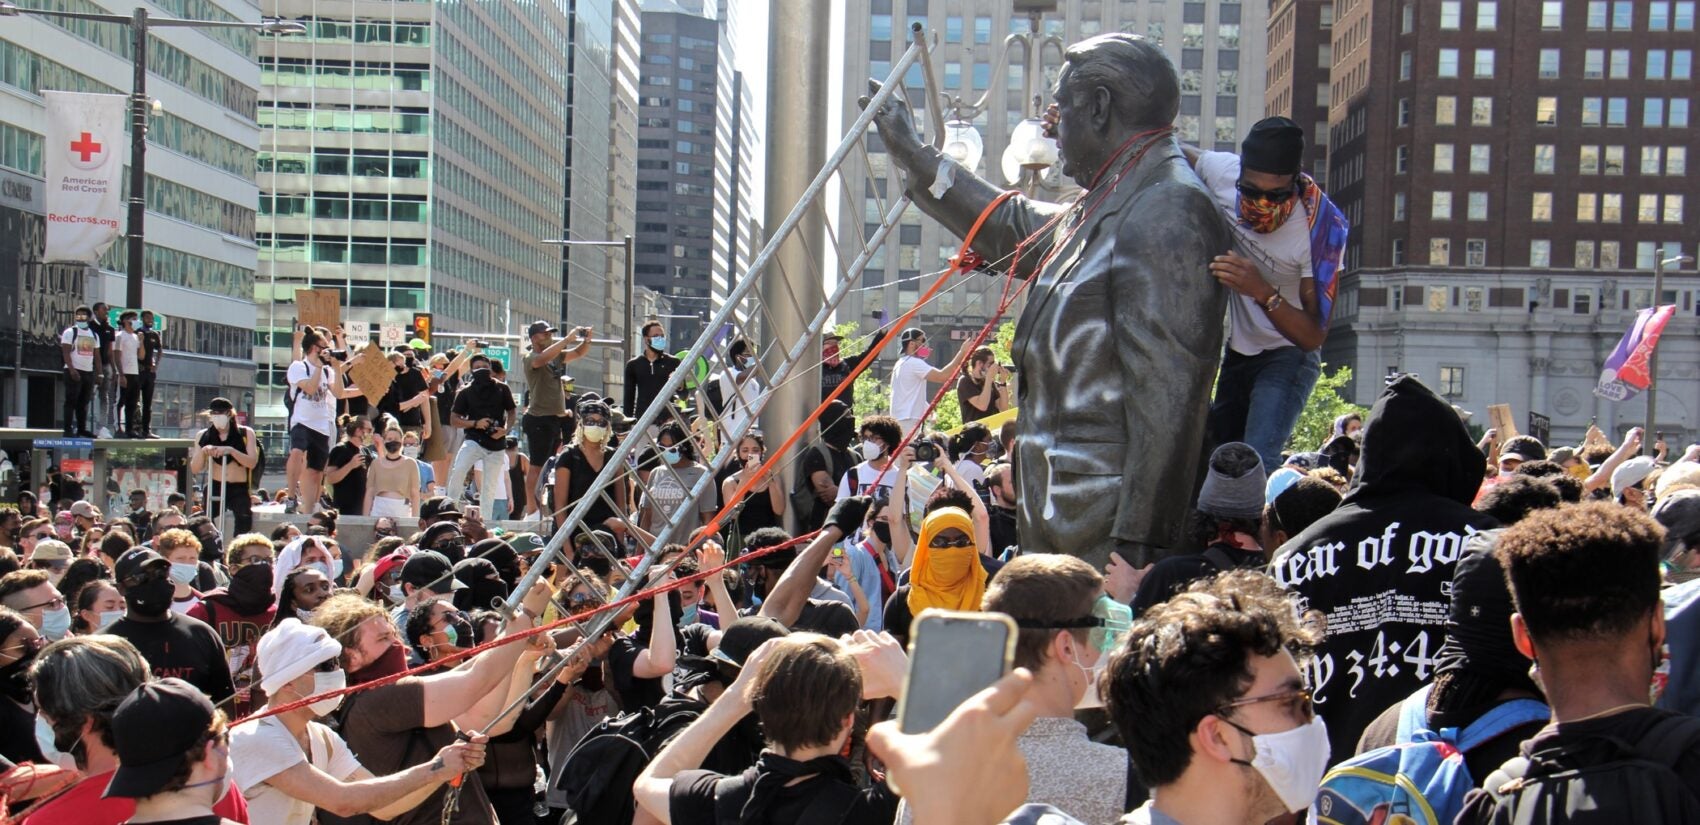 Protesters try to take down the statue of former mayor and police chief Frank Rizzo in front of the Municipal Services Building on May 30, 2020. (Emma Lee/WHYY)